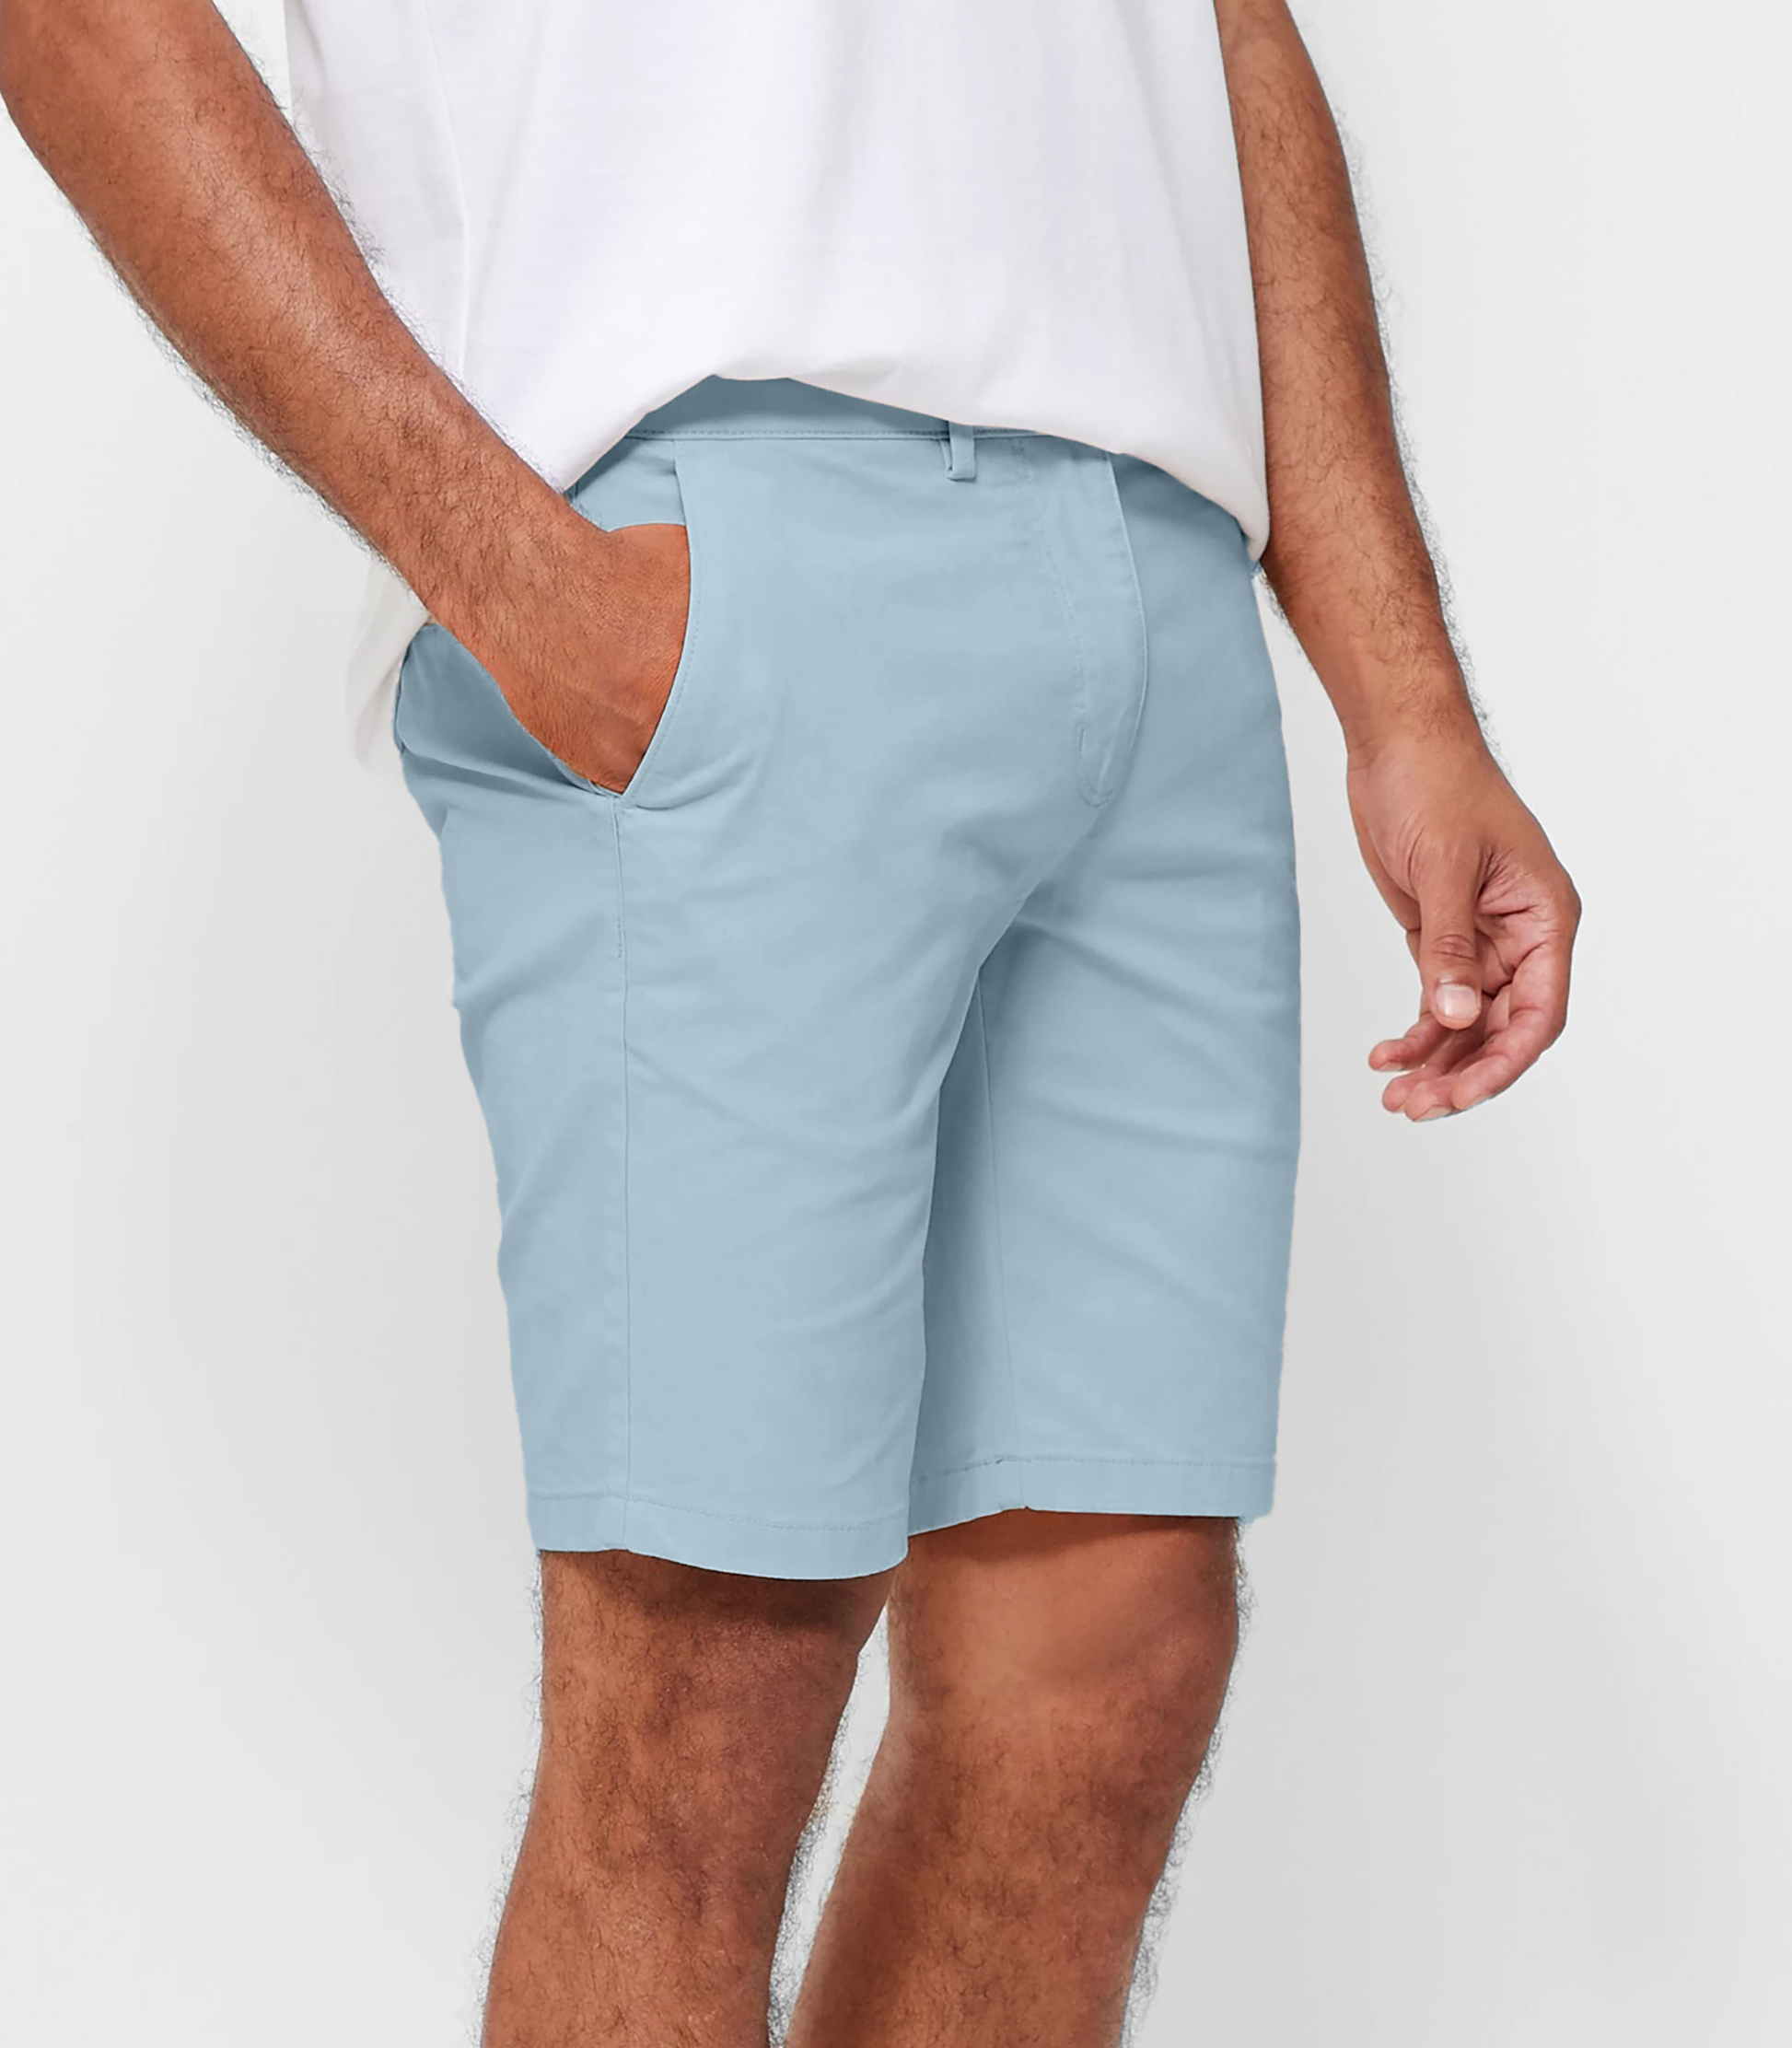 Mens Sky Blue chinos shorts with front slanted pockets, jetted back pockets. zip fly fastening and brown horne buttons on the waistband and back pockets, the fit is a slim fit, this is worn with a white tee and white t-shirt